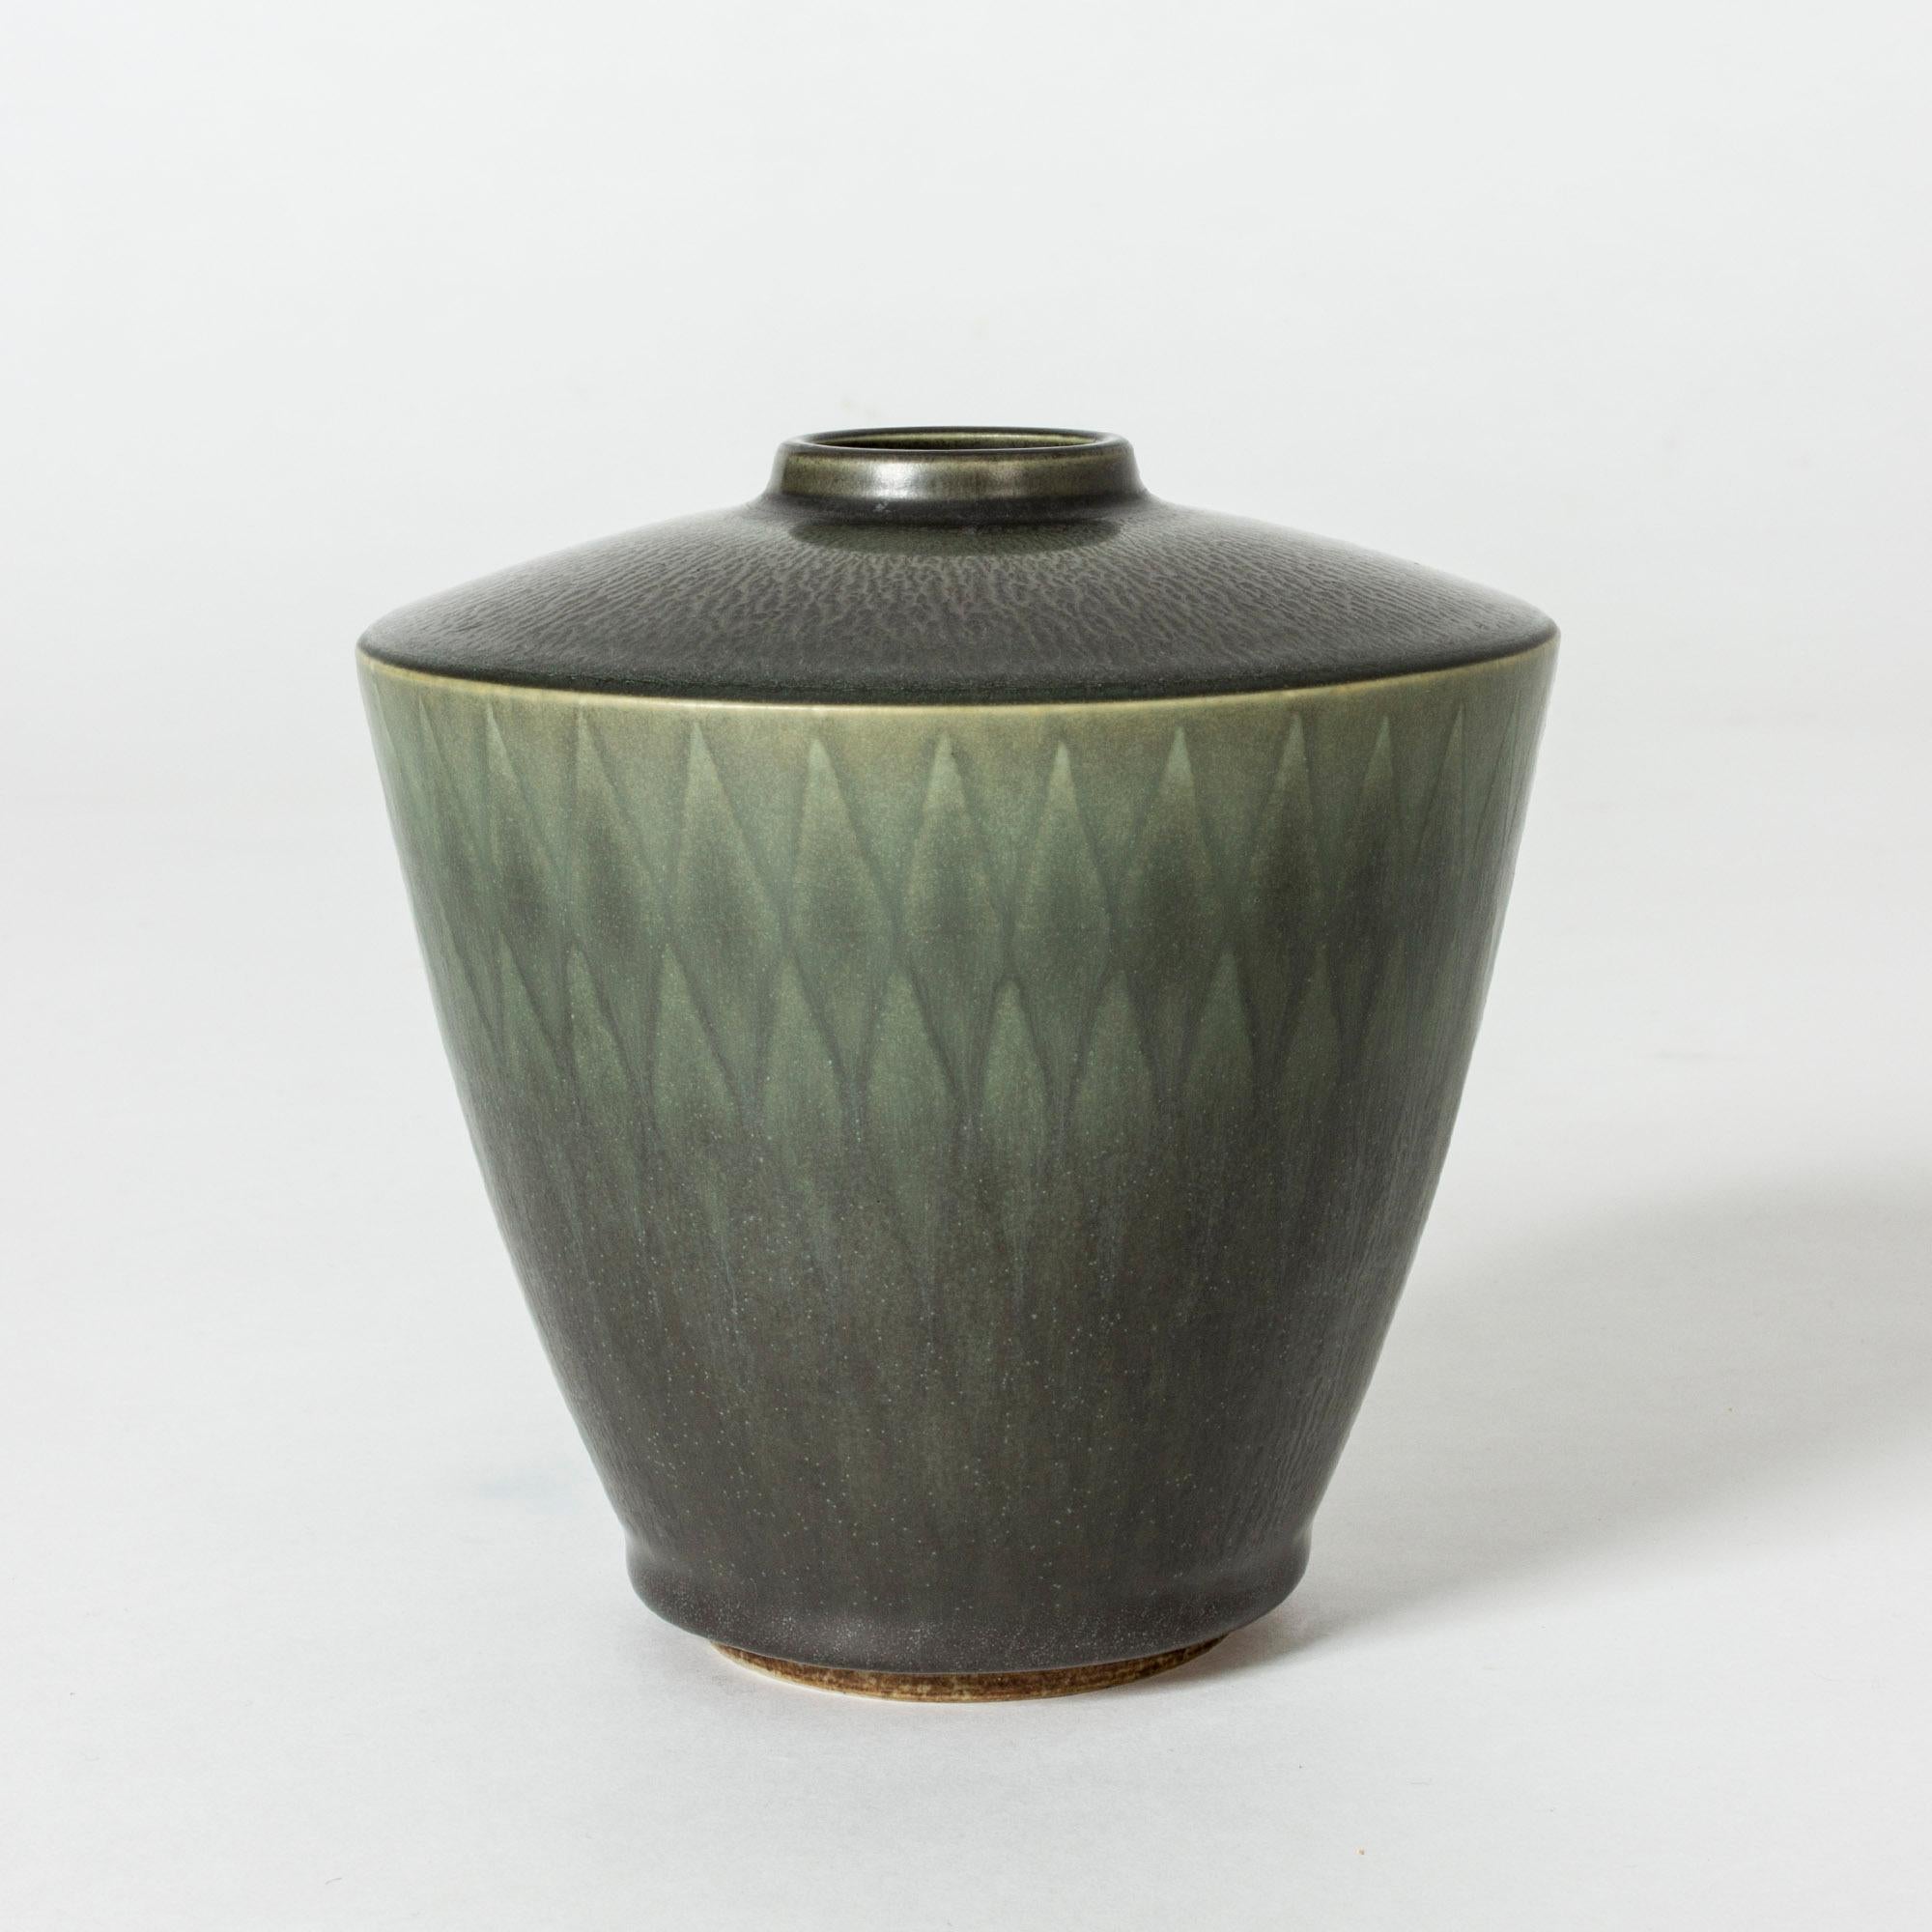 Rare stoneware vase by Berndt Friberg in a compact shape and distinct silhouette. Beautiful green hare’s fur glaze with a graphic pattern.